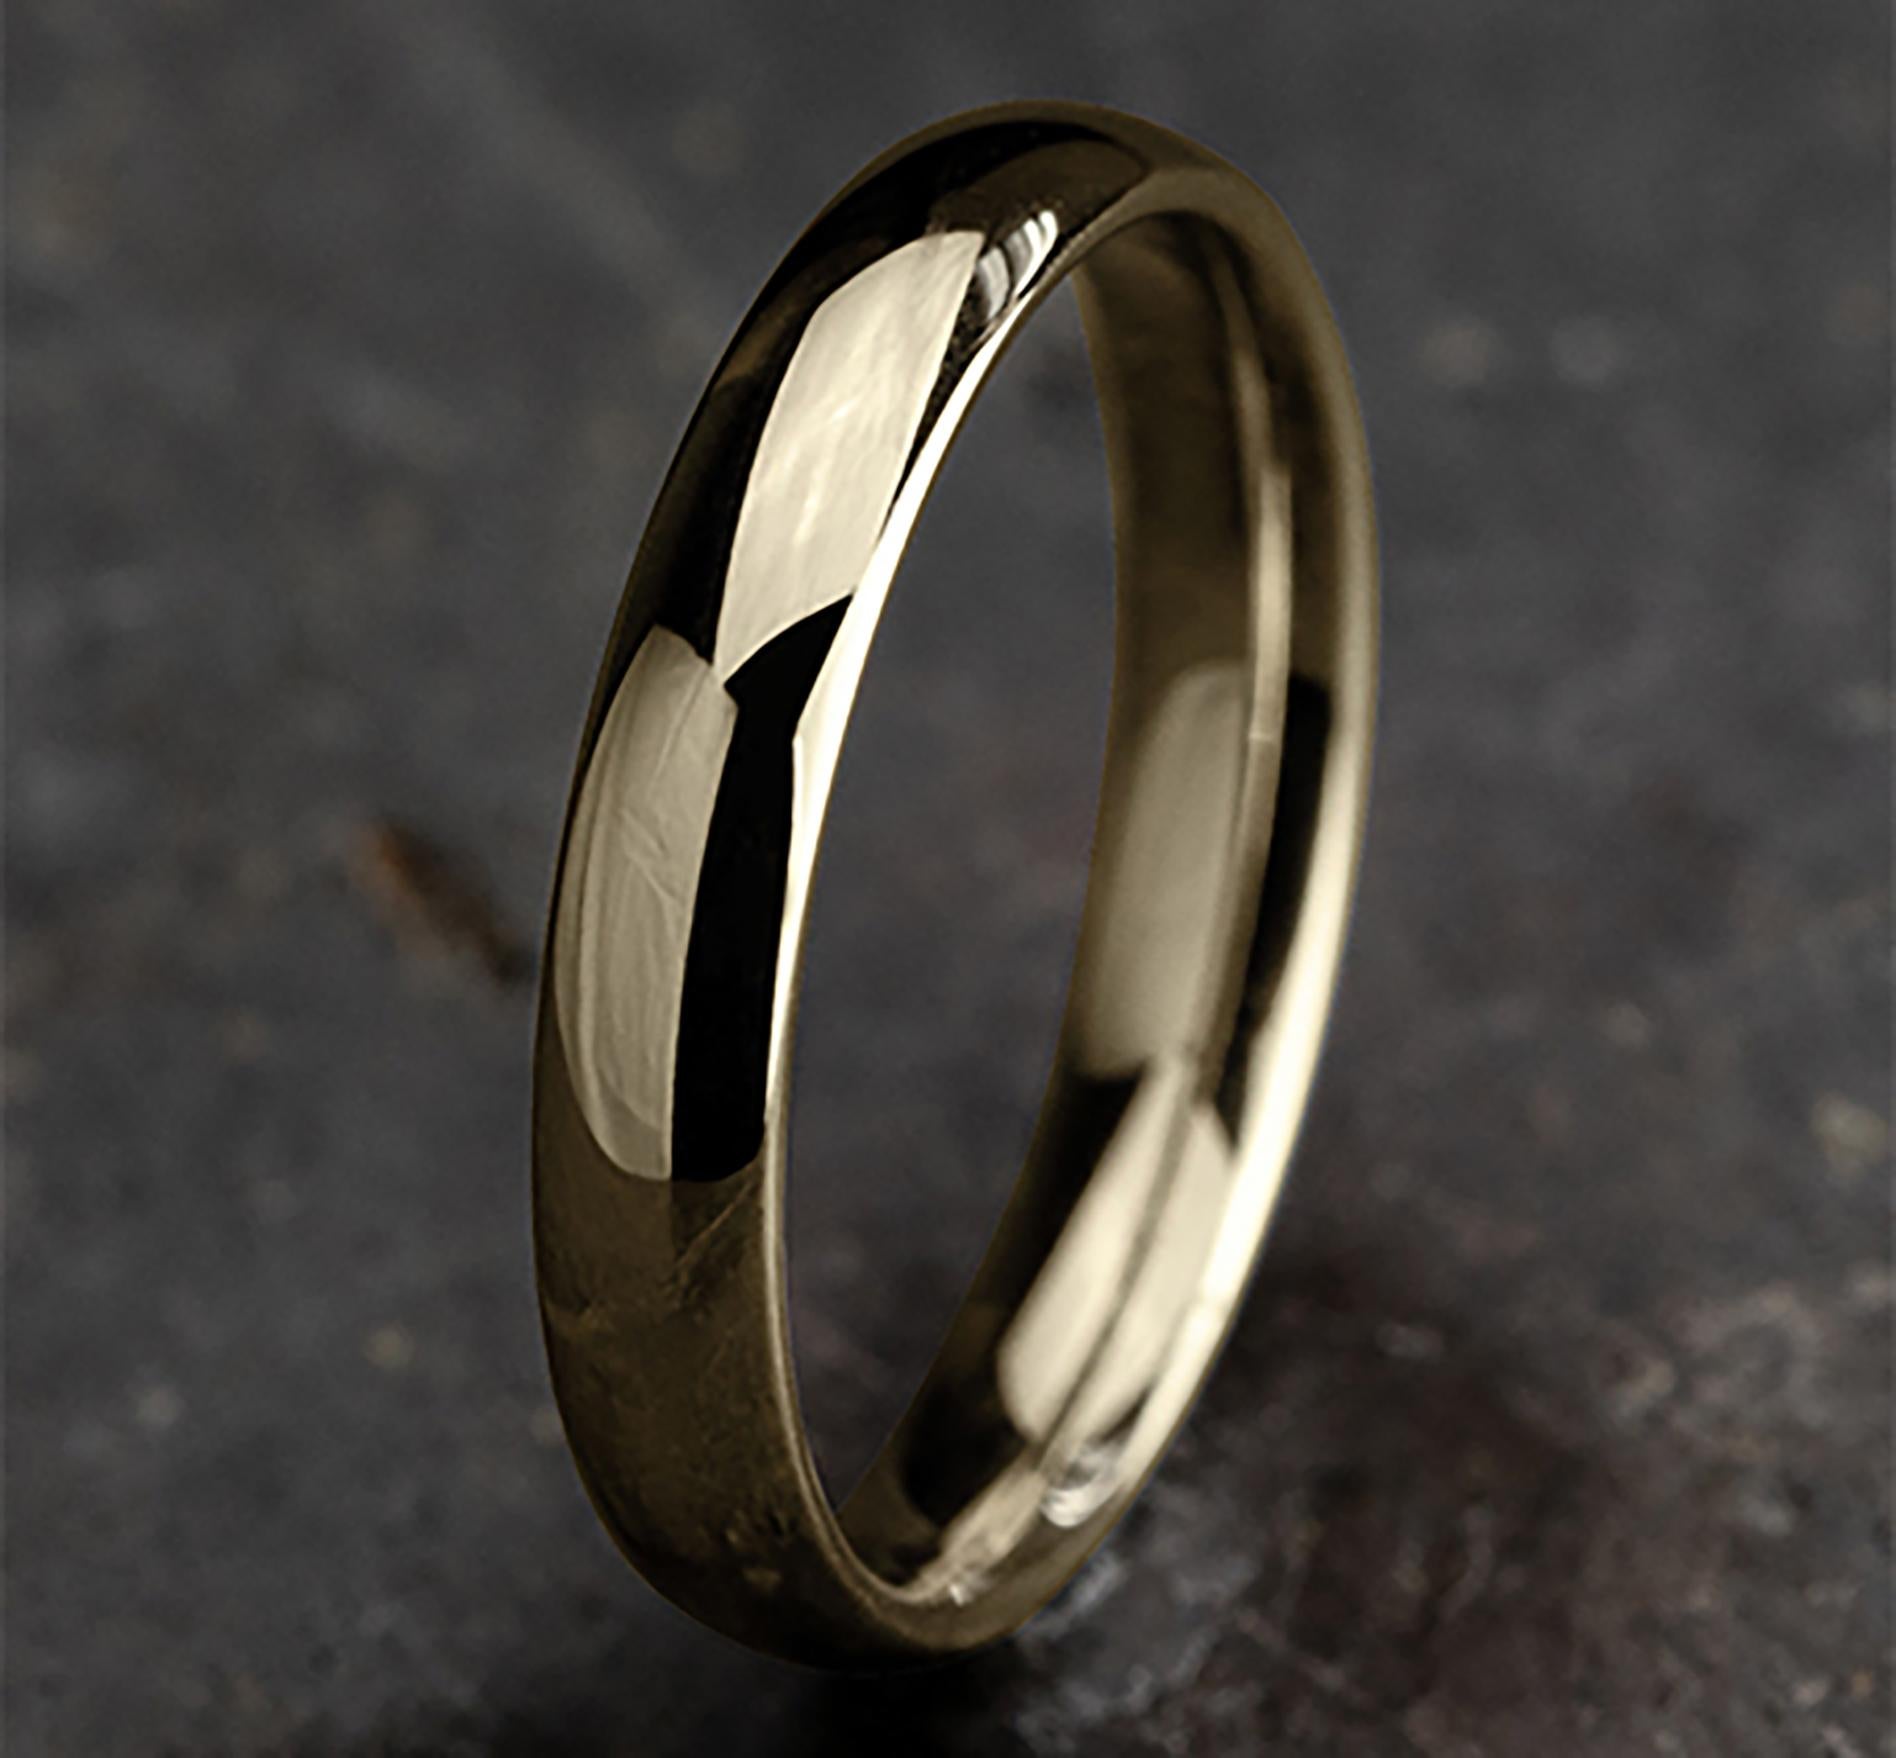 Benchmark Classic Comfort Fit Wedding Band in 14K Yellow Gold, Width 4mm In New Condition For Sale In New York, NY